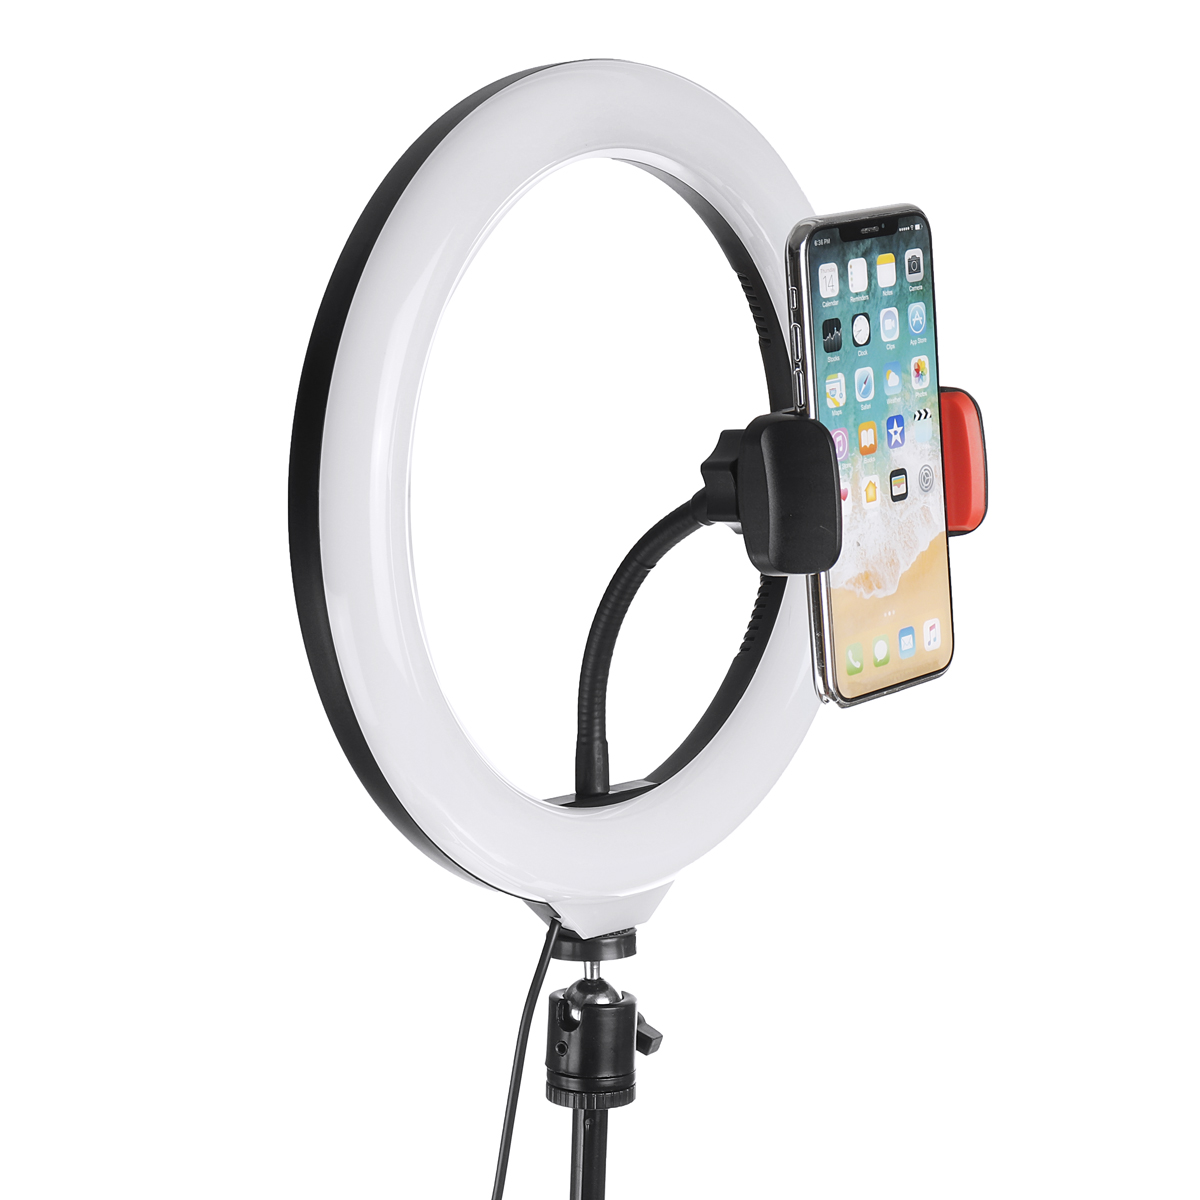 Bakeey-10inch-LED-Ring-Light-Portable-Telescopic-Tripod-Fill-Light-Dimmable-Flexible-Stand-Phone-Hol-1746941-4